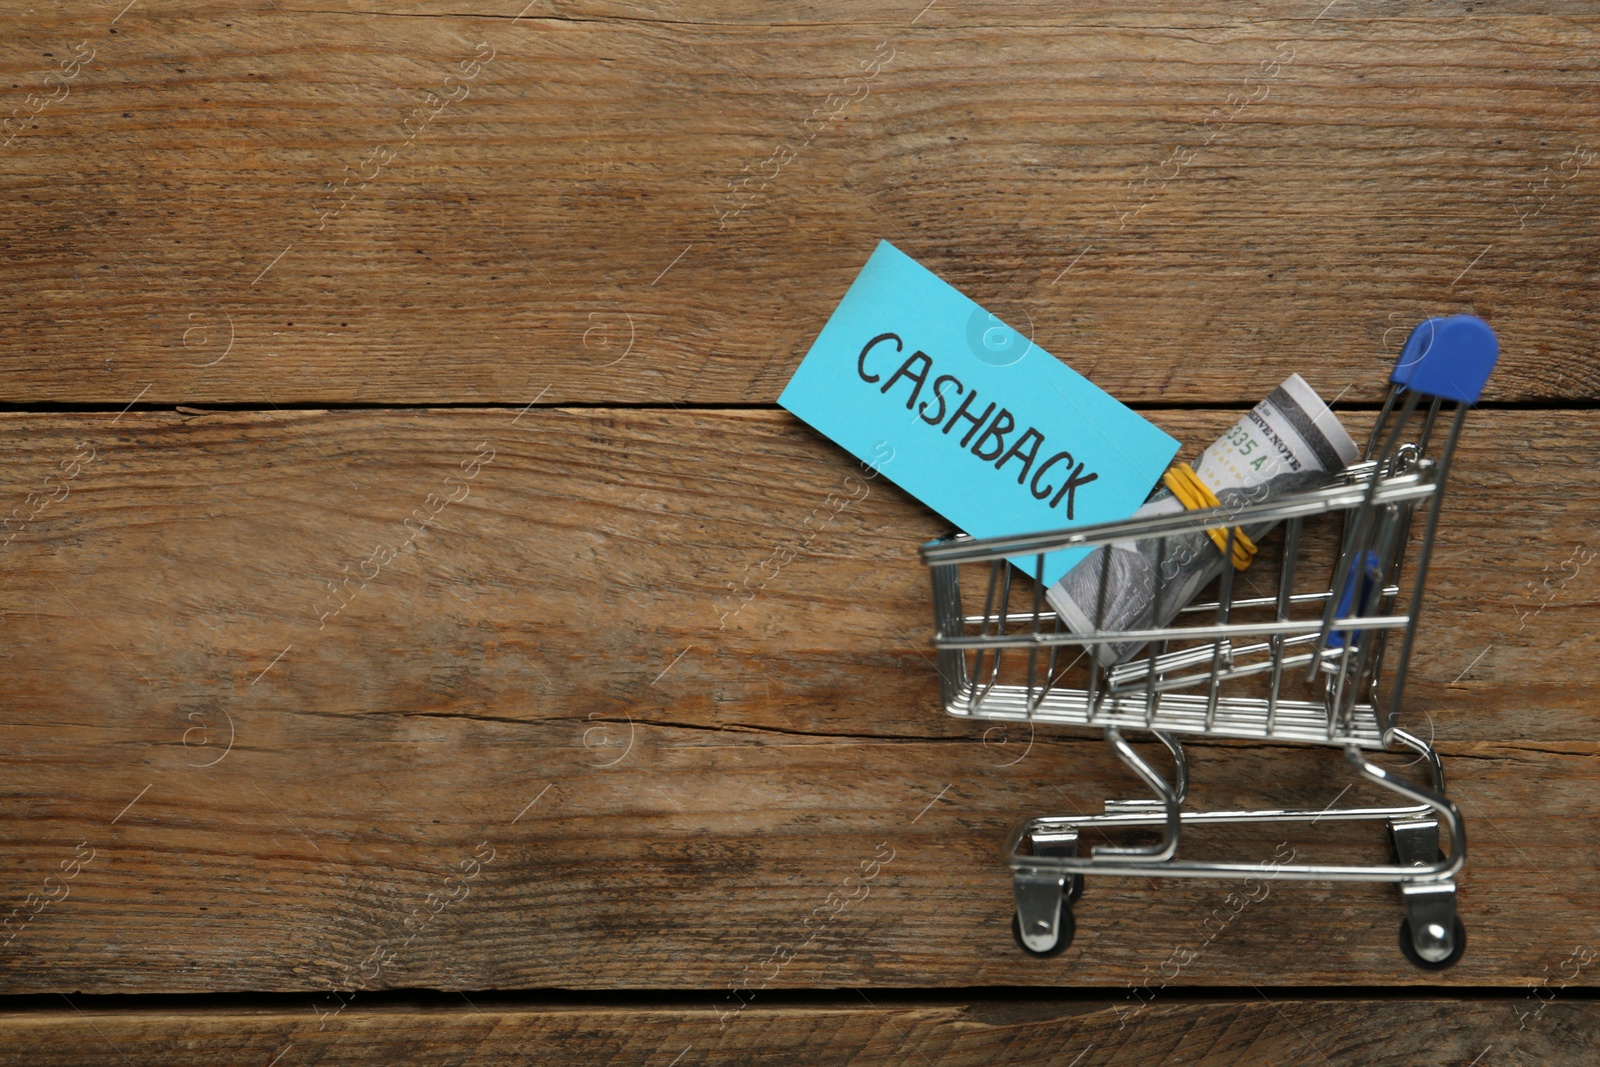 Photo of Card with word Cashback, rolled dollar banknotes and shopping cart on wooden background, flat lay. Space for text